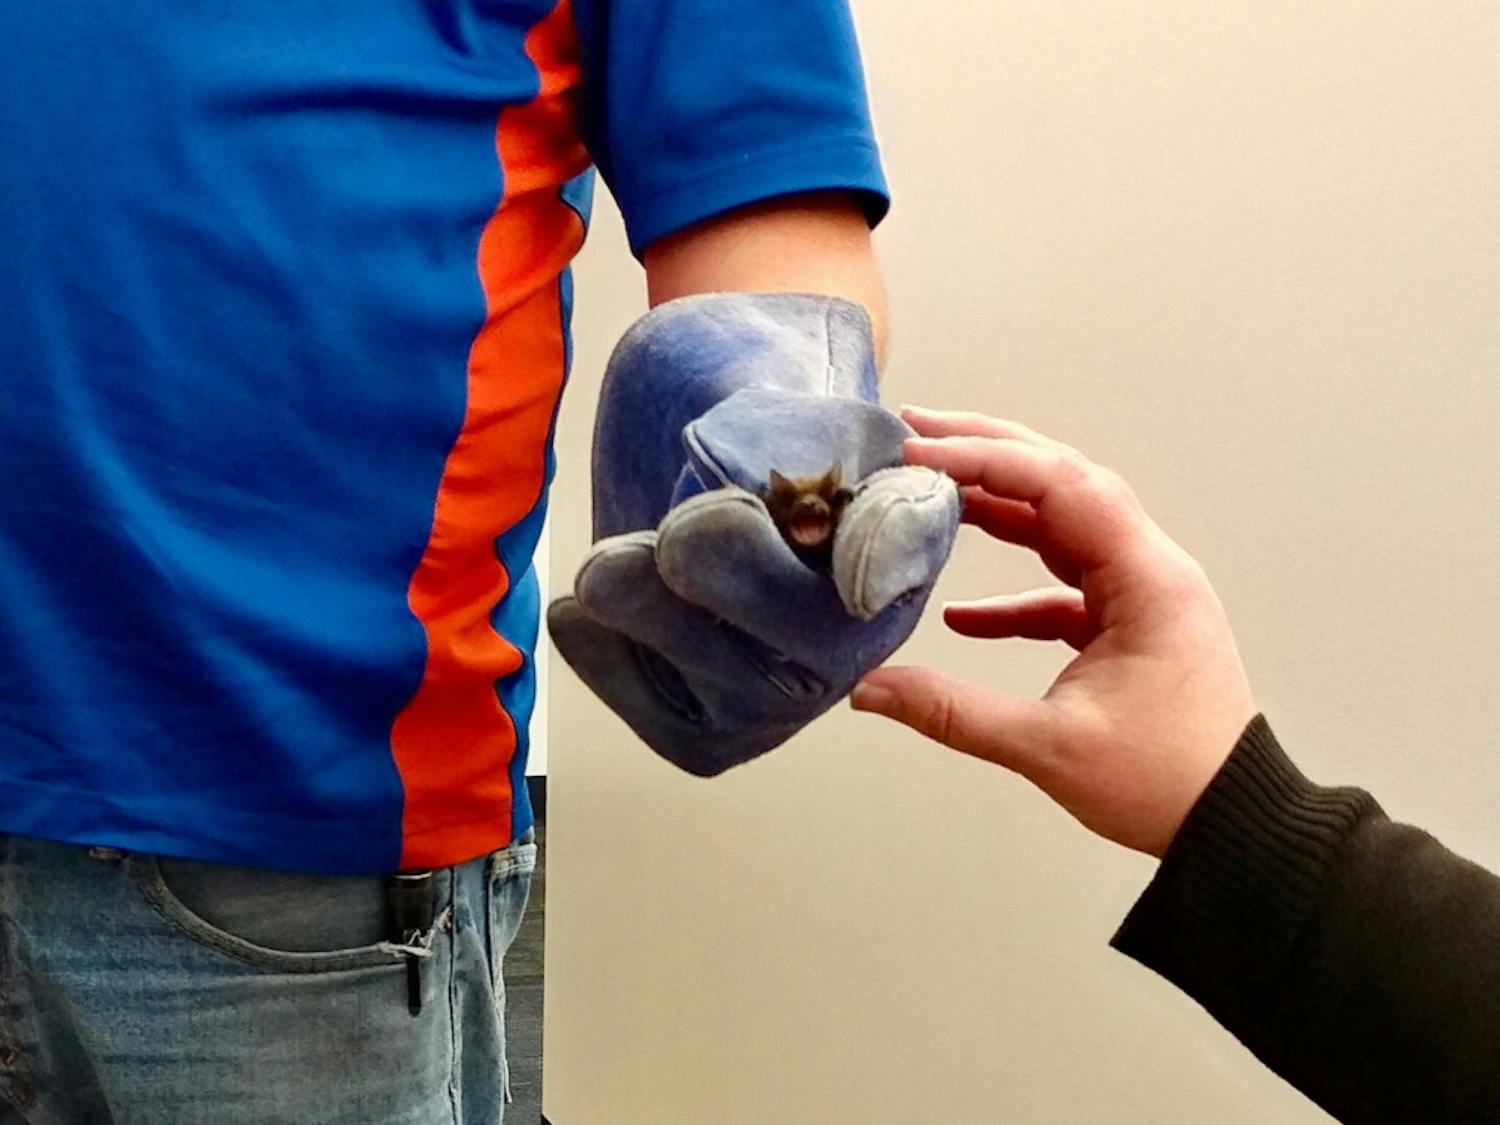 Libatty West, a furry brown bat the size of an egg, was safely removed Wednesday morning when he was found sleeping in Library West. Libatty's origins are unknown. 